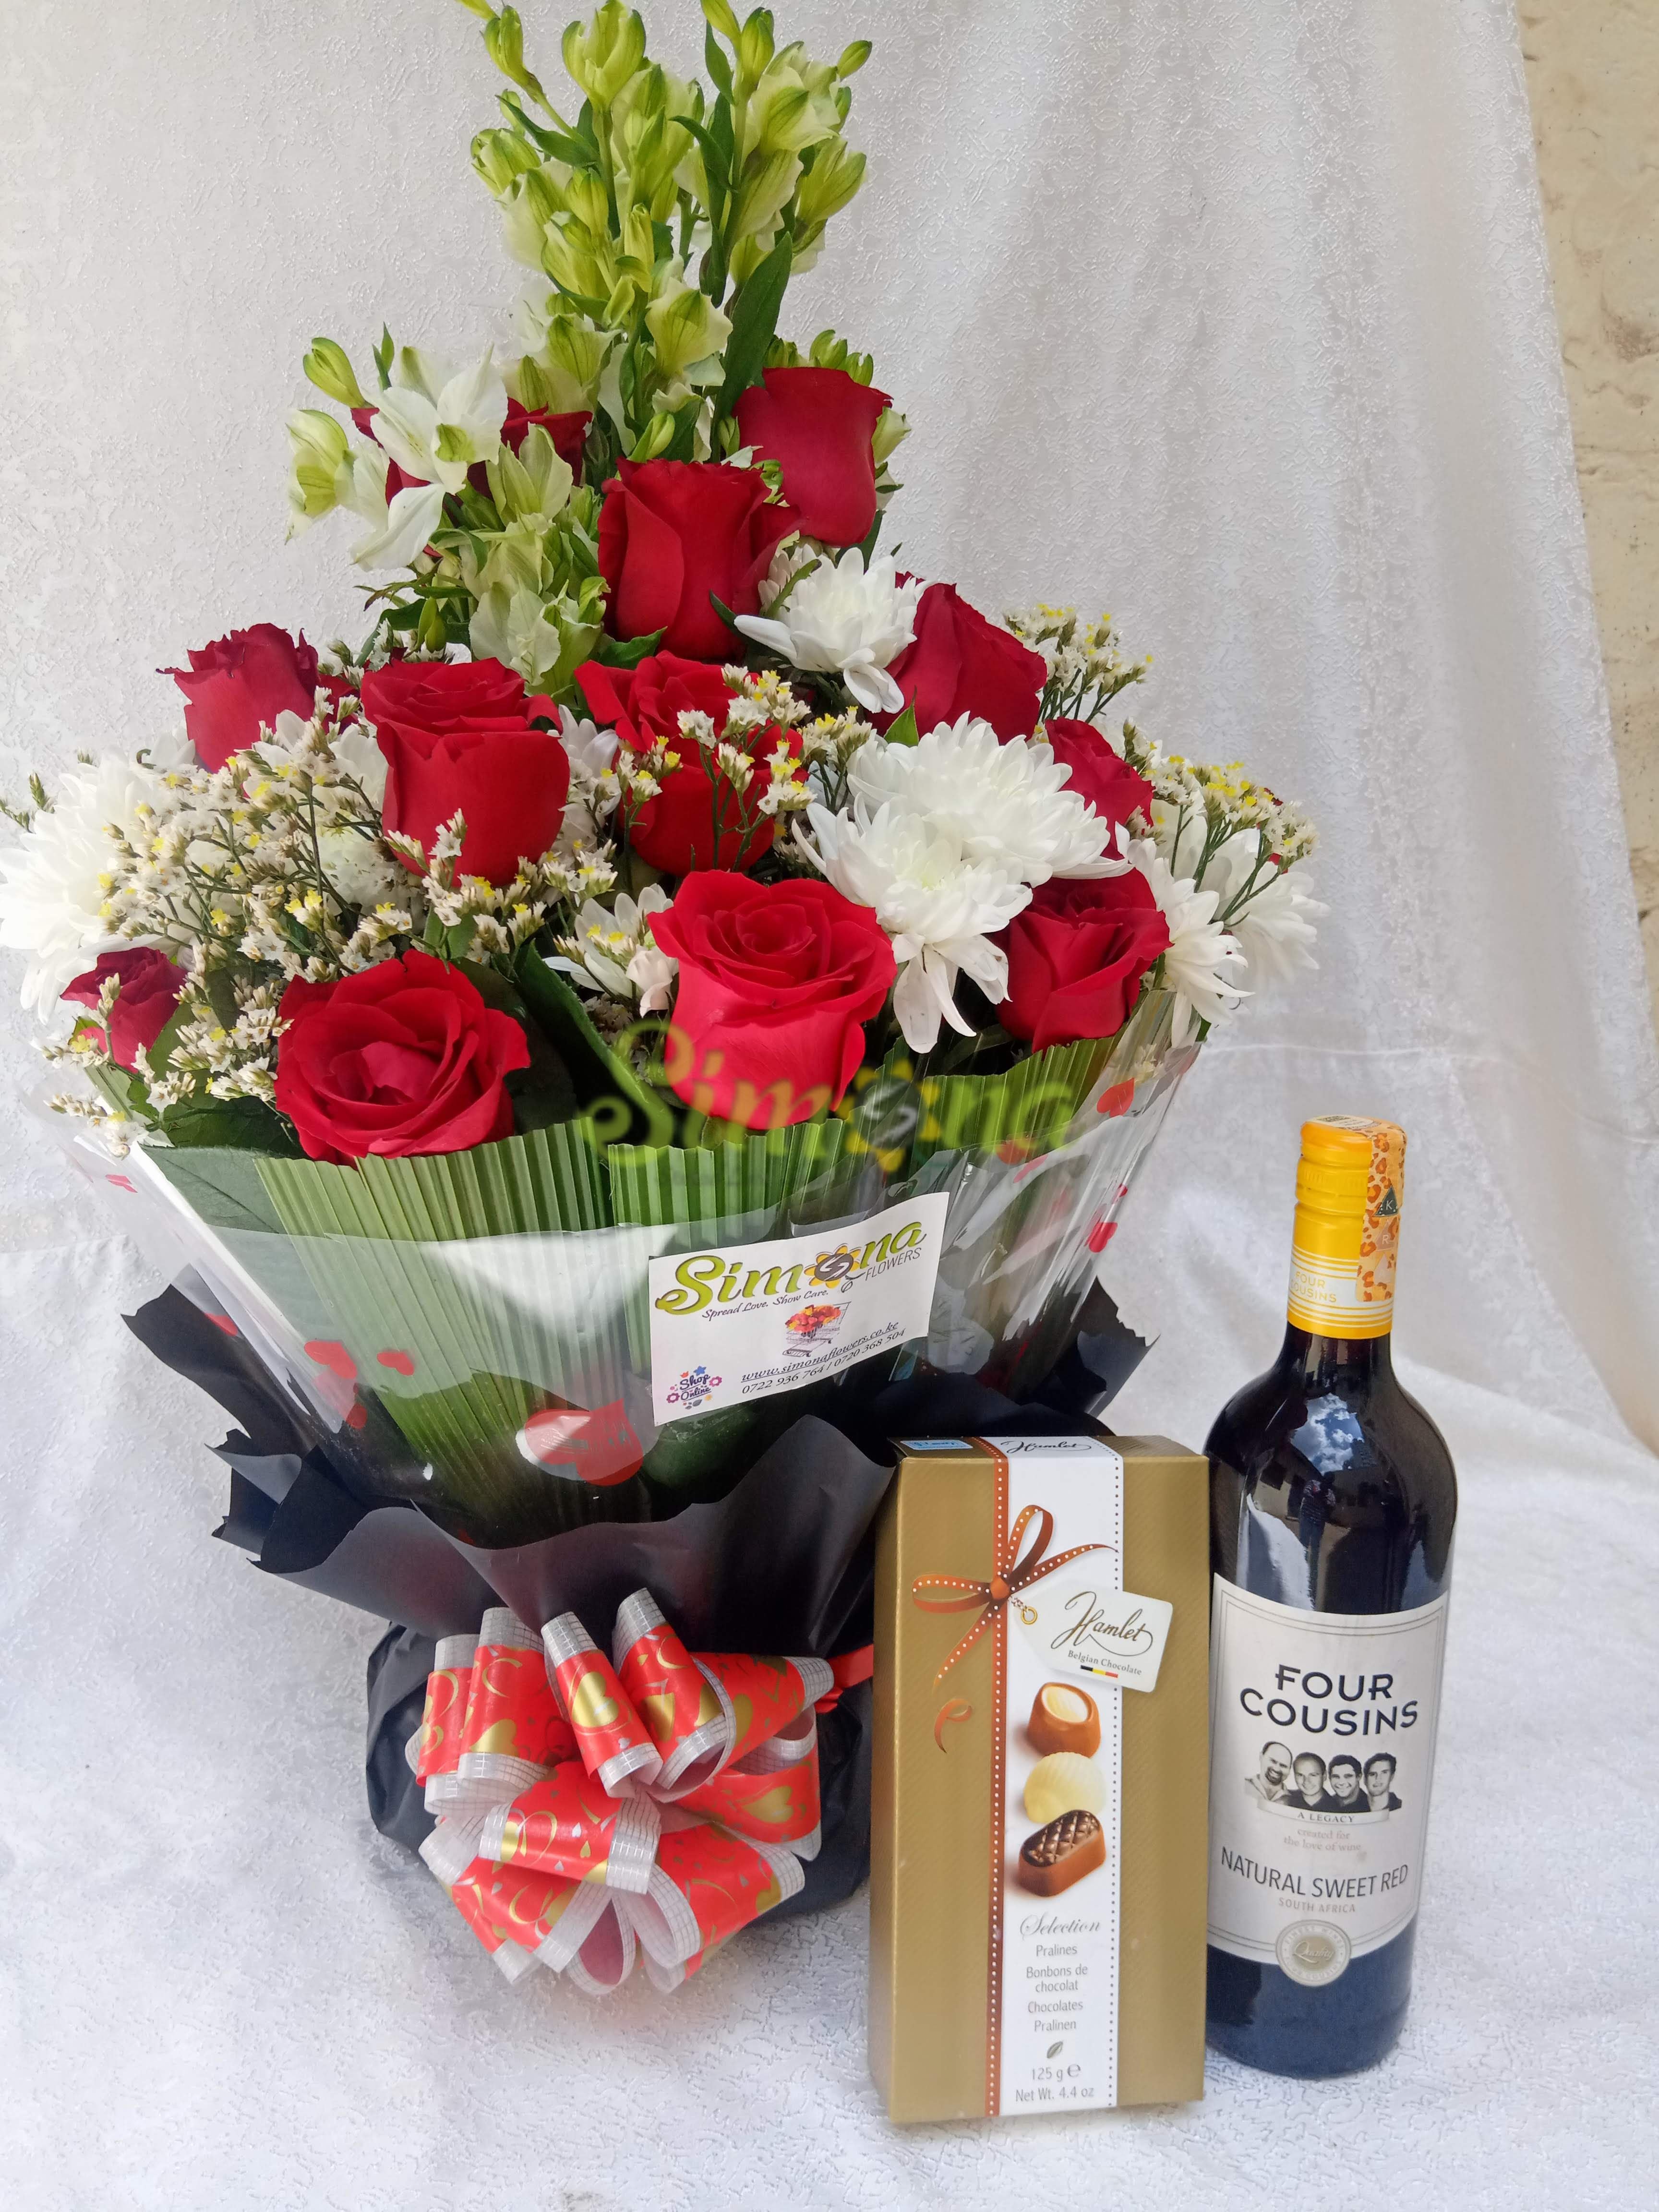 Diamond bouquet with red wine and hamlet chocolate